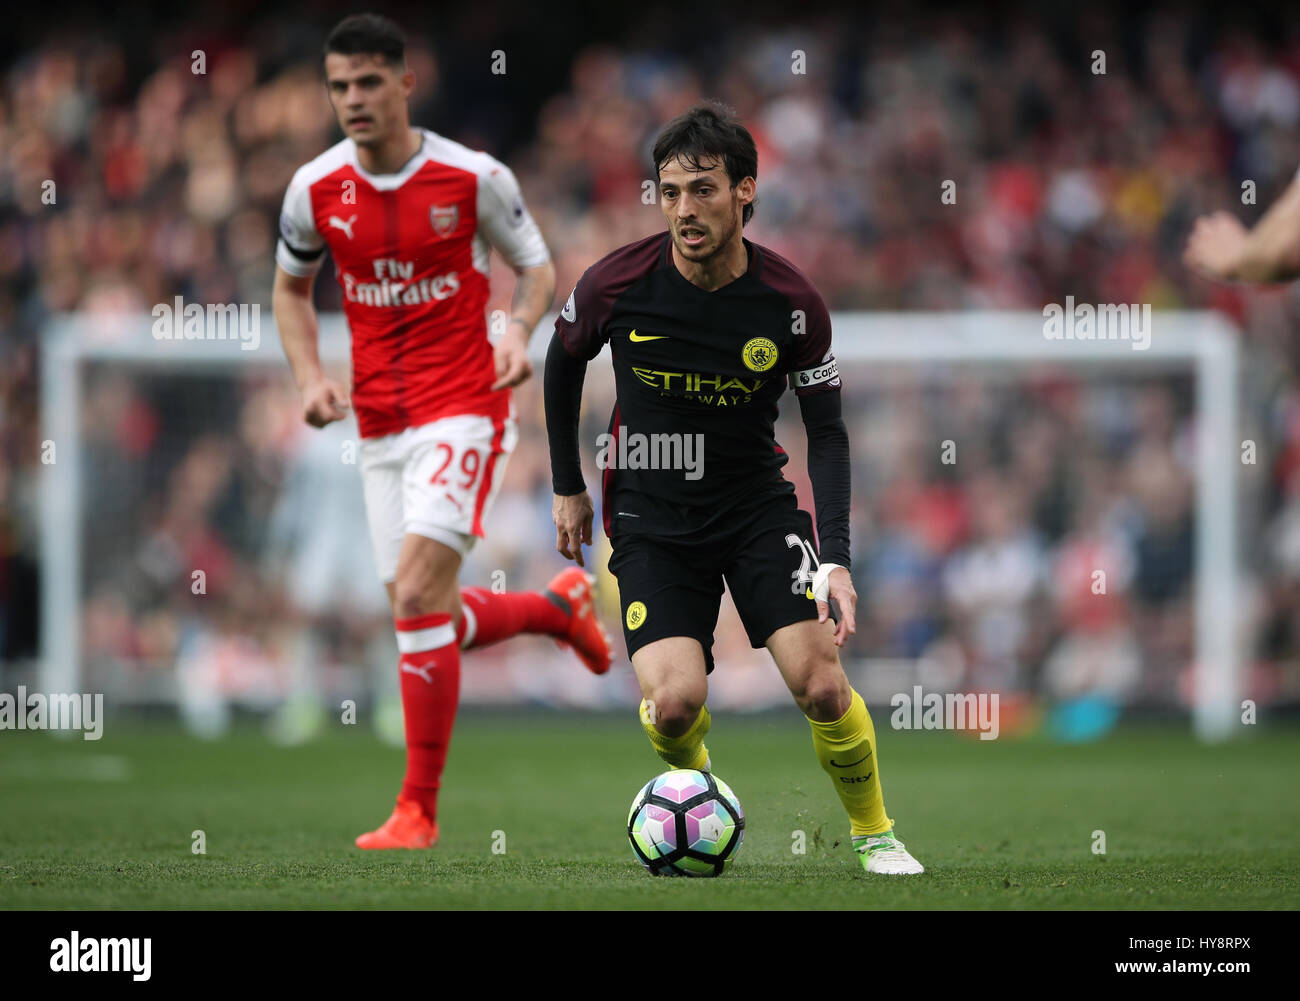 Manchester City's David Silva during the Premier League match at the Emirates Stadium, London. PRESS ASSOCIATION Photo. Picture date: Sunday April 2, 2017. See PA story SOCCER Arsenal. Photo credit should read: Nick Potts/PA Wire. RESTRICTIONS: No use with unauthorised audio, video, data, fixture lists, club/league logos or 'live' services. Online in-match use limited to 75 images, no video emulation. No use in betting, games or single club/league/player publications. Stock Photo